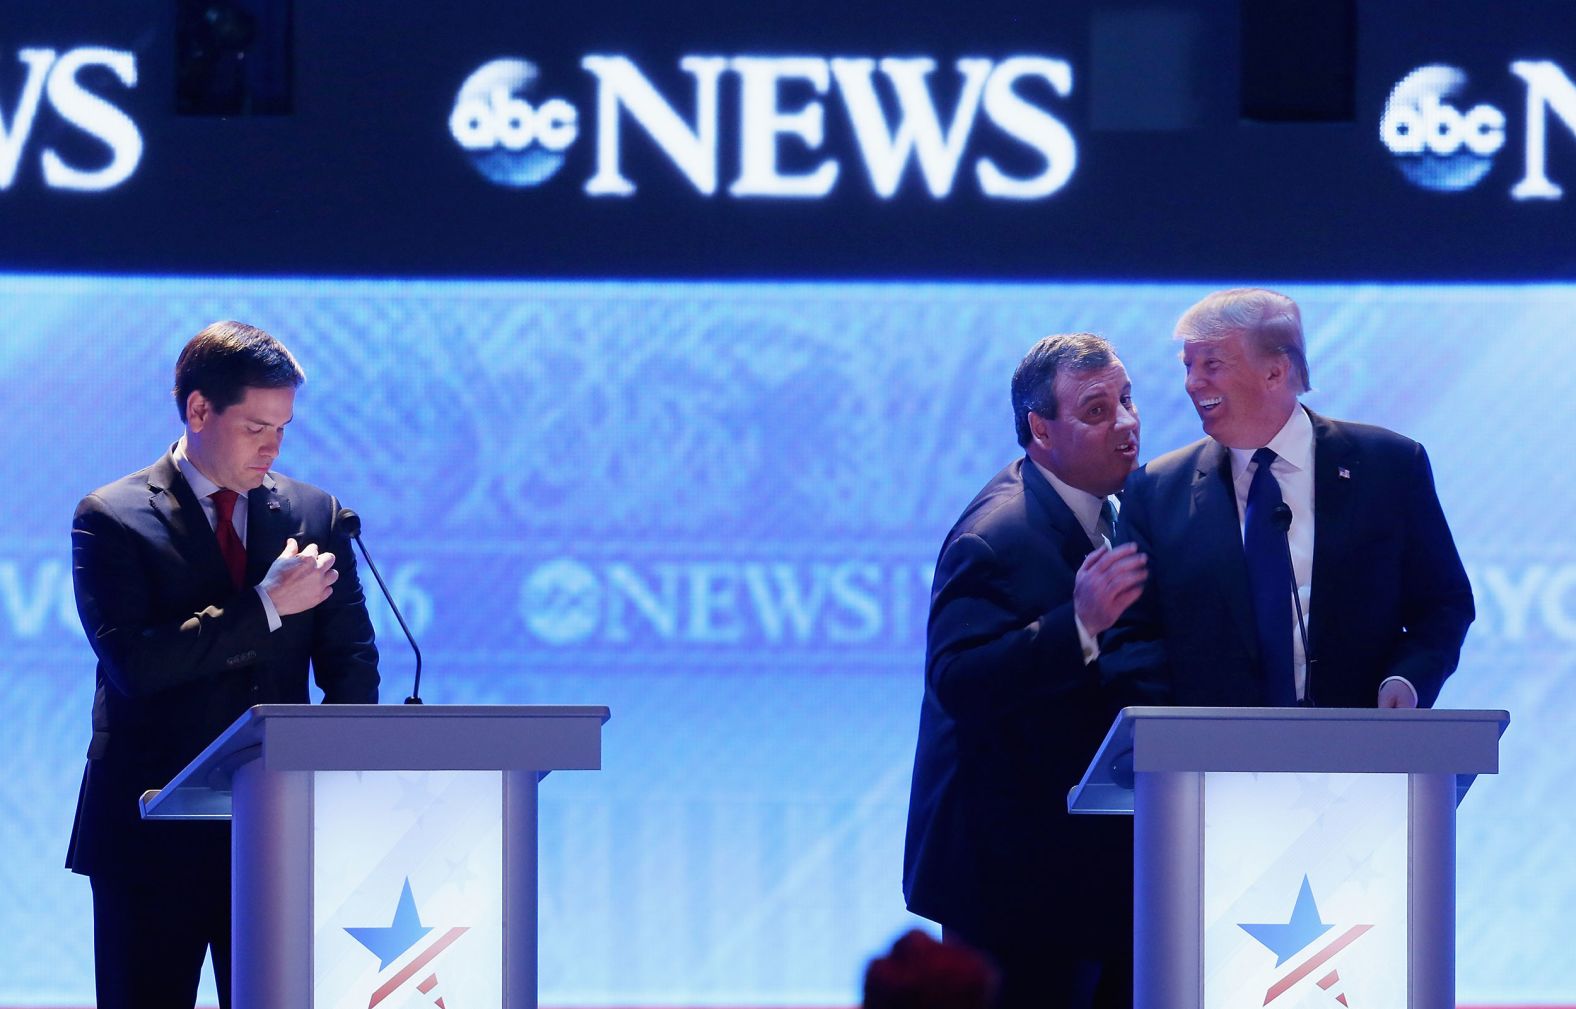 Christie visits with fellow presidential candidate Donald Trump during a commercial break of a Republican debate in February 2016. From the debate's outset, Christie pestered US Sen. Marco Rubio, left. His relentless attack against Rubio, who was surging in the polls, was one of <a href="index.php?page=&url=http%3A%2F%2Fwww.cnn.com%2F2016%2F02%2F07%2Fpolitics%2Frepublican-debate-takeaways%2Findex.html" target="_blank">the memorable takeaways of the night</a>.